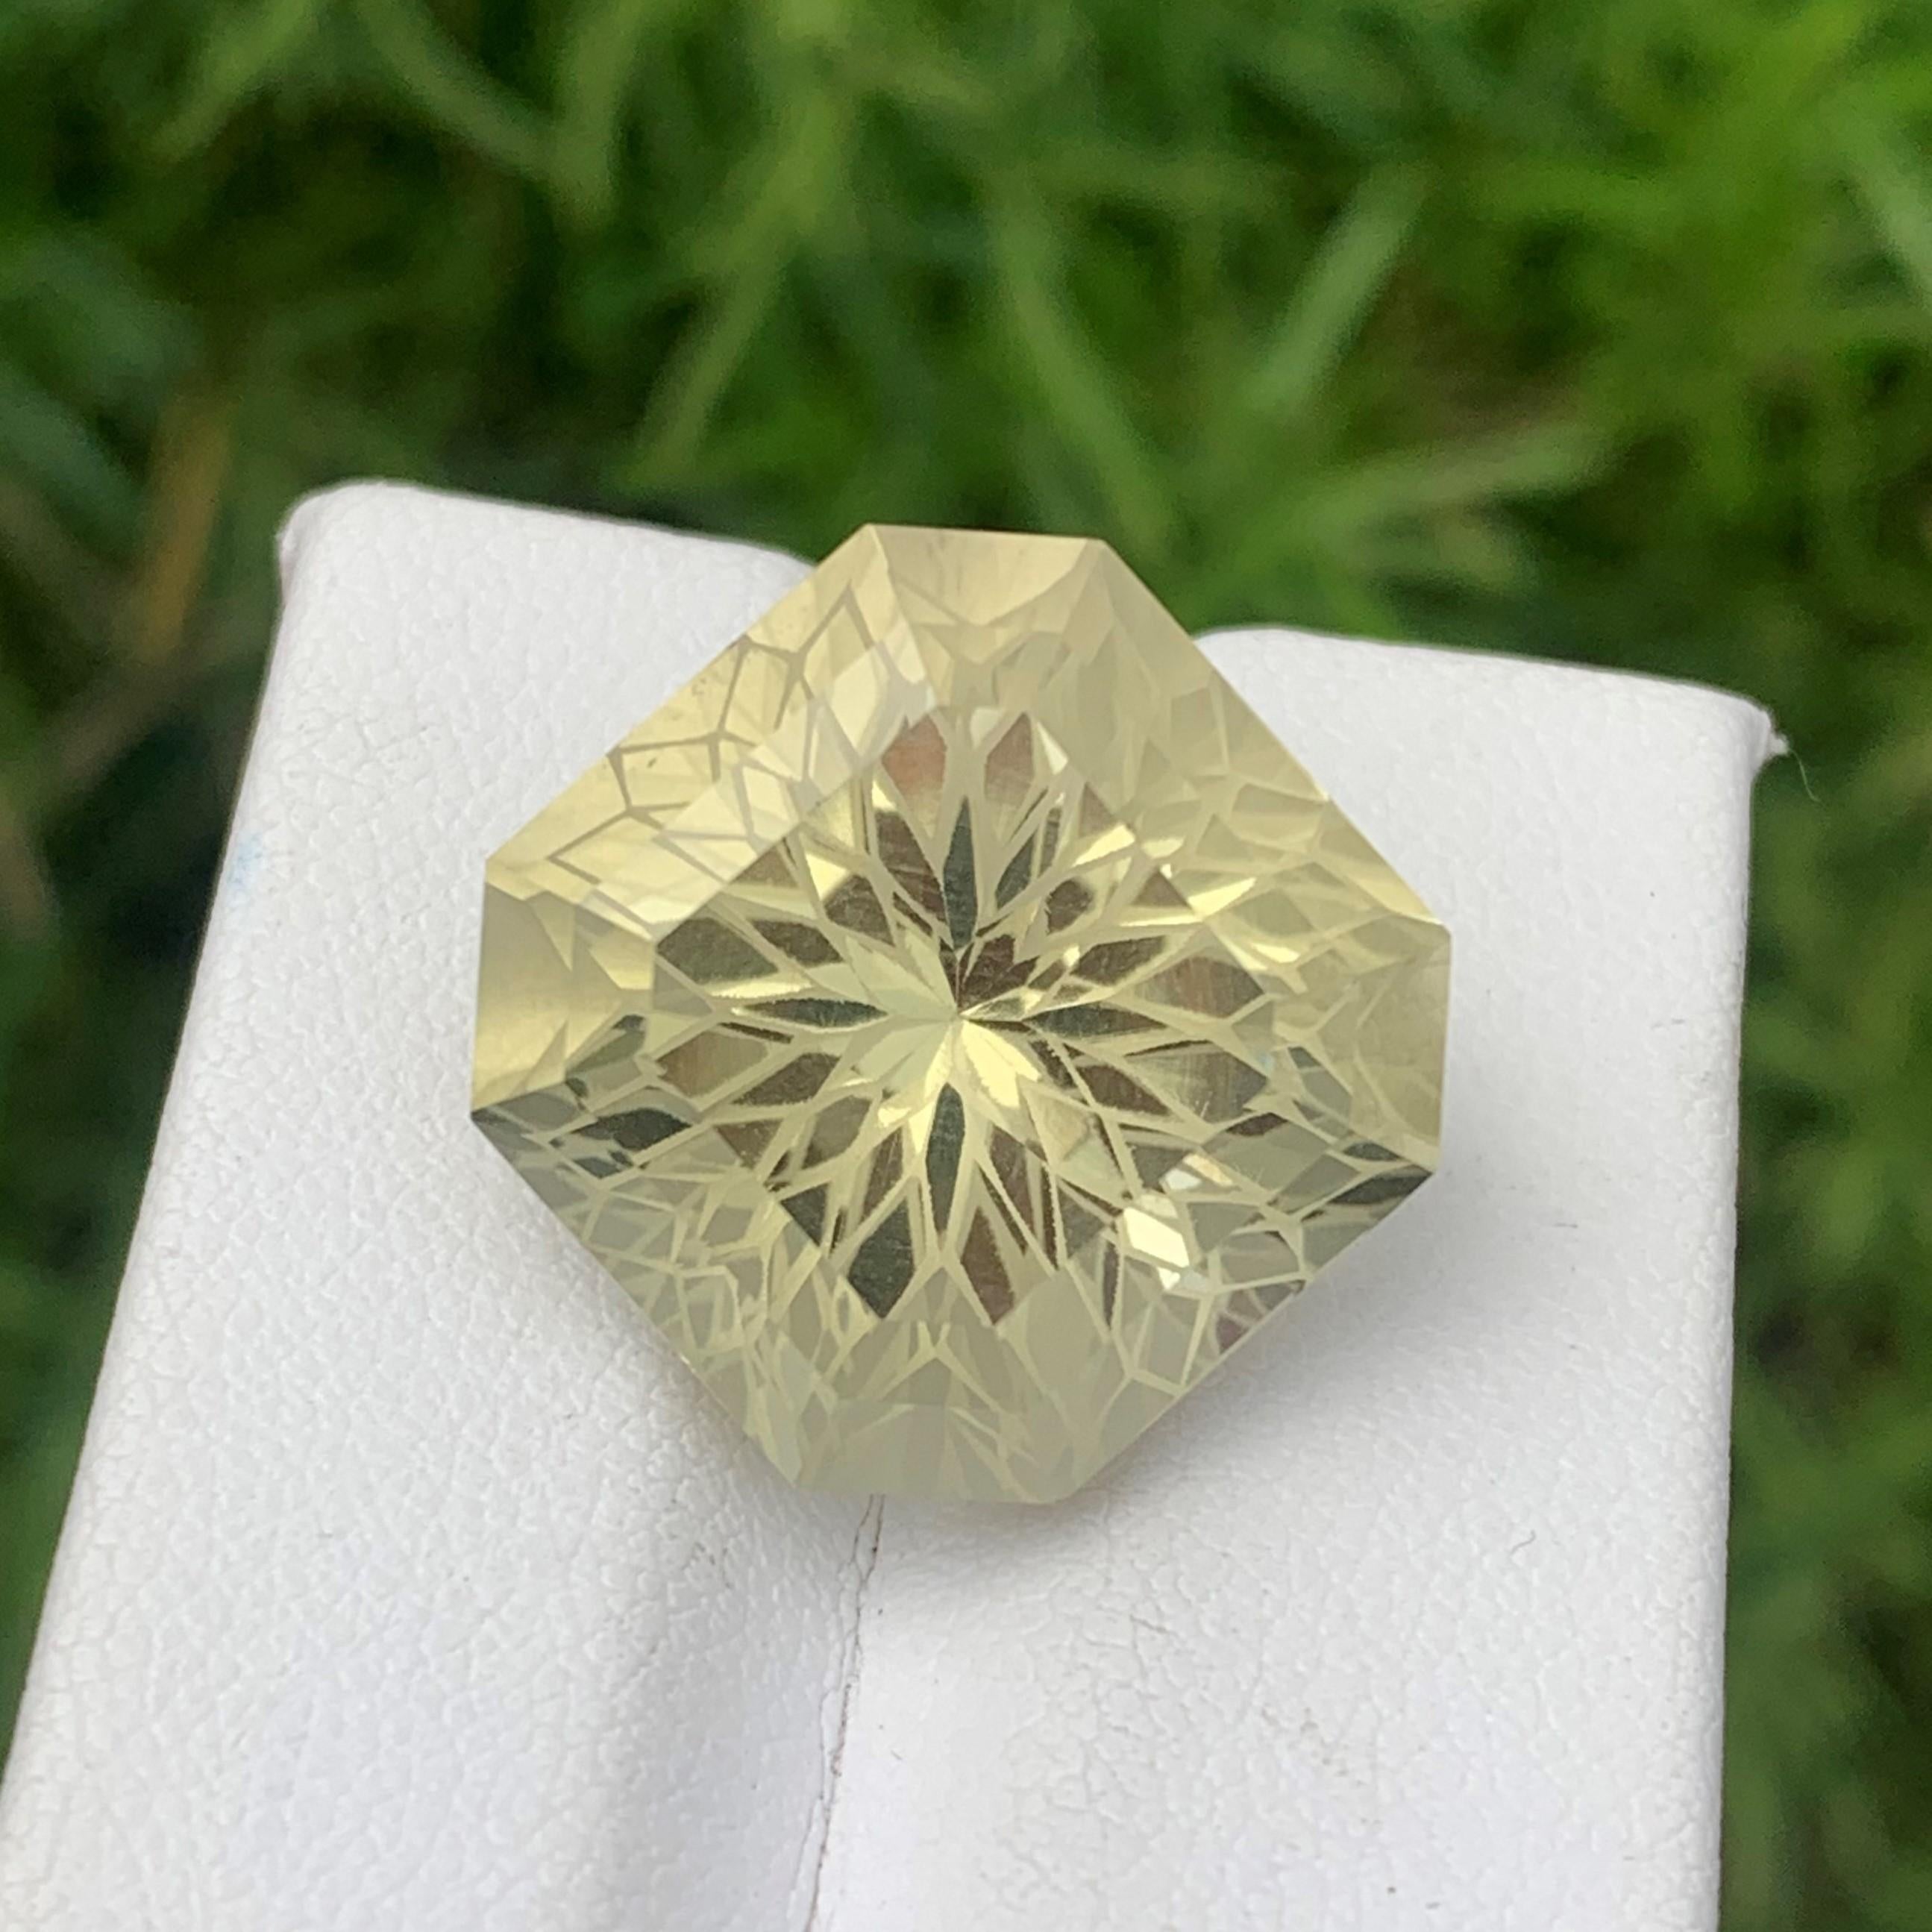 Faceted Citrine
Weight : 24 Carats
Dimensions : 17.4x17.3x13.9 Mm
Clarity : Eye Clean 
Origin : Brazil
Color: Yellow
Shape: Square
Cut: Flower Facet
Certificate: On Demand
Month: November
.
The Many Healing Properties of Citrine
Increase Optimism,